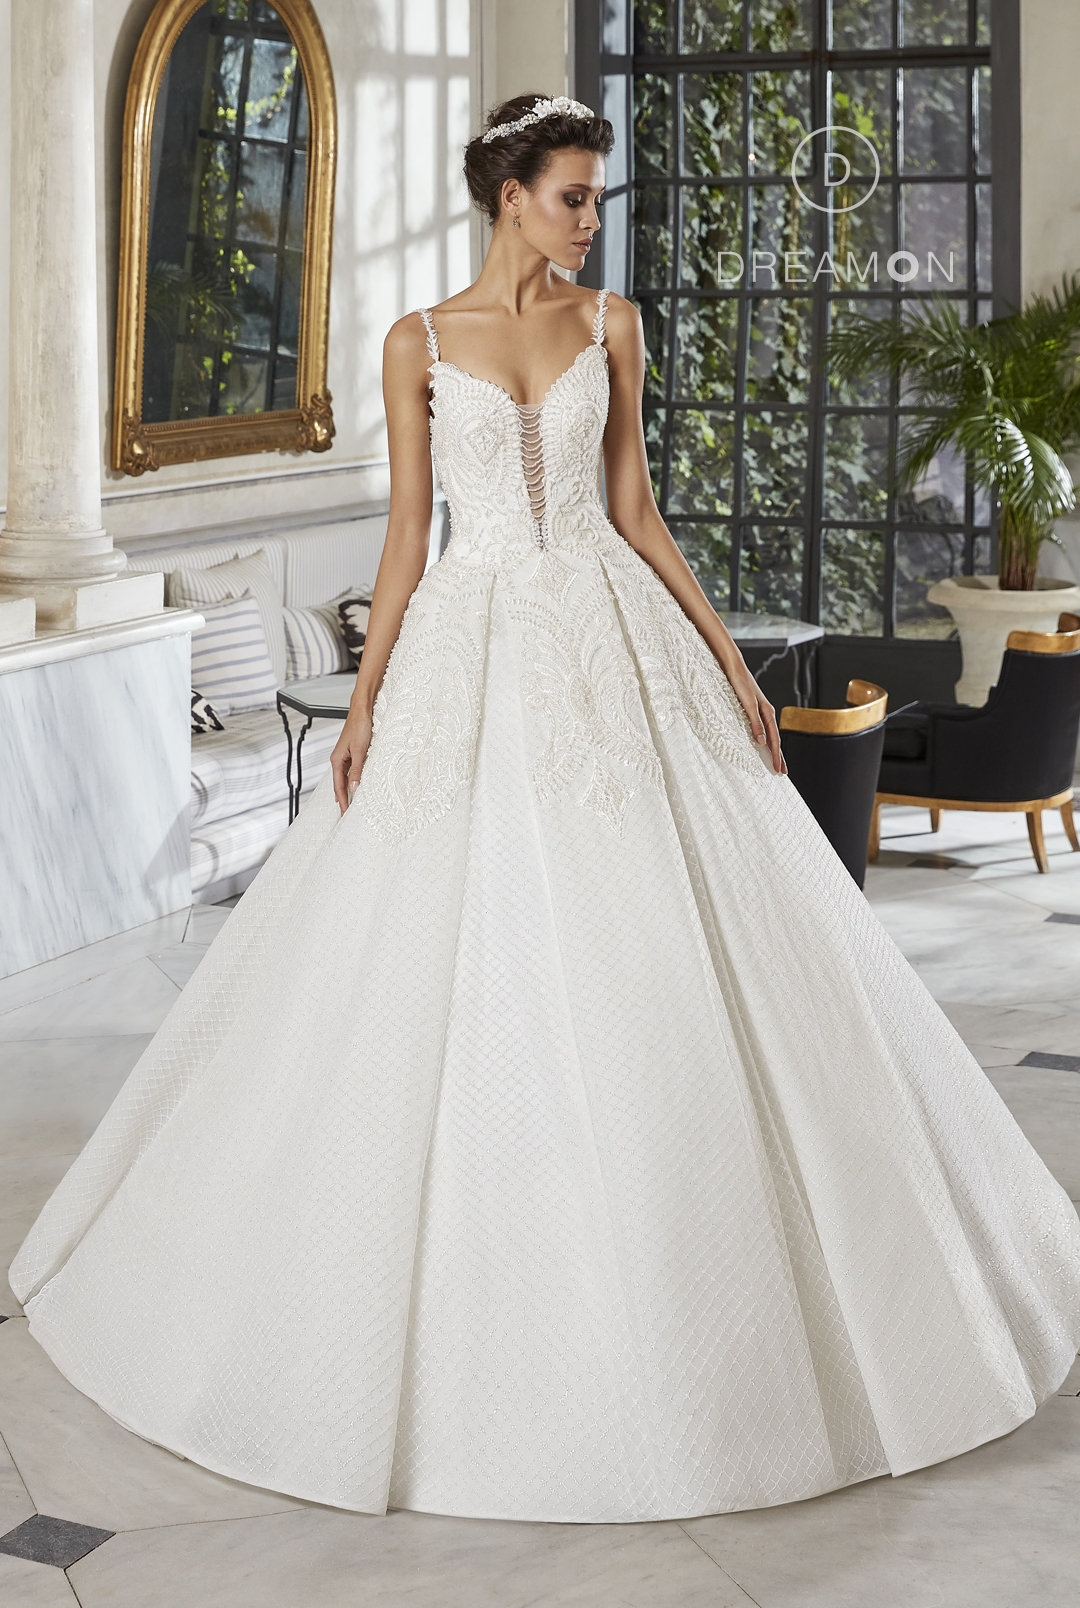 A Princess ball Gown Wedding Dress with ...